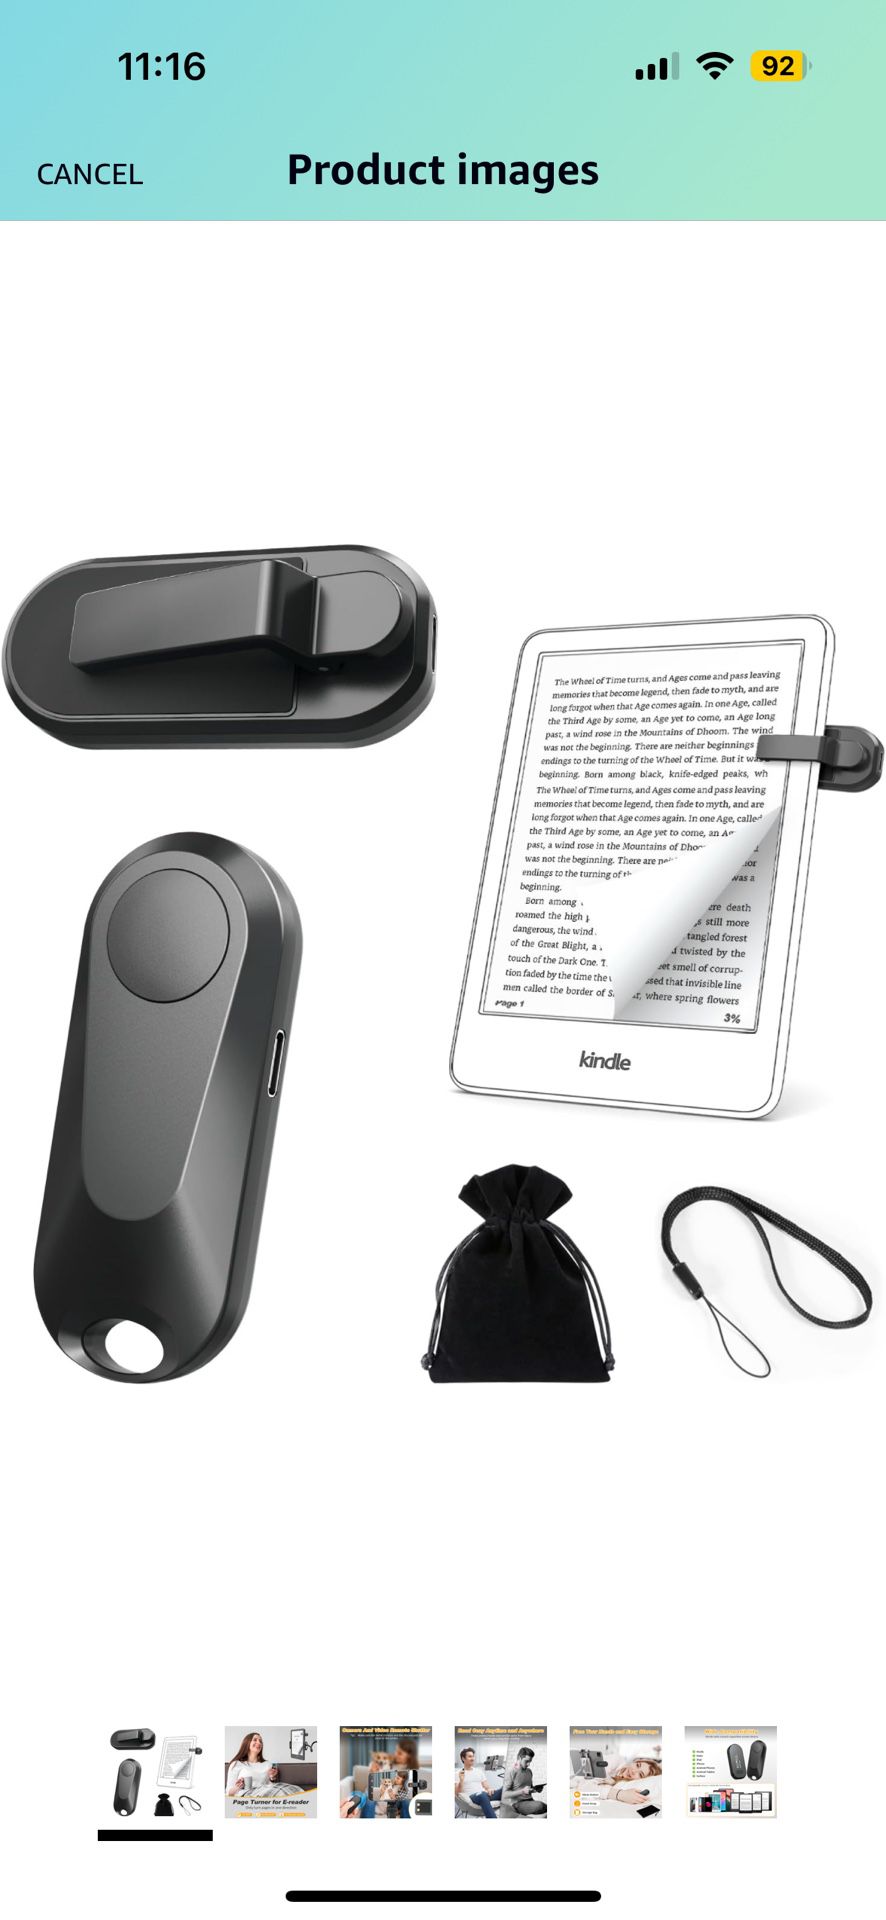 New Never Opened kindle Page Turner With Remote